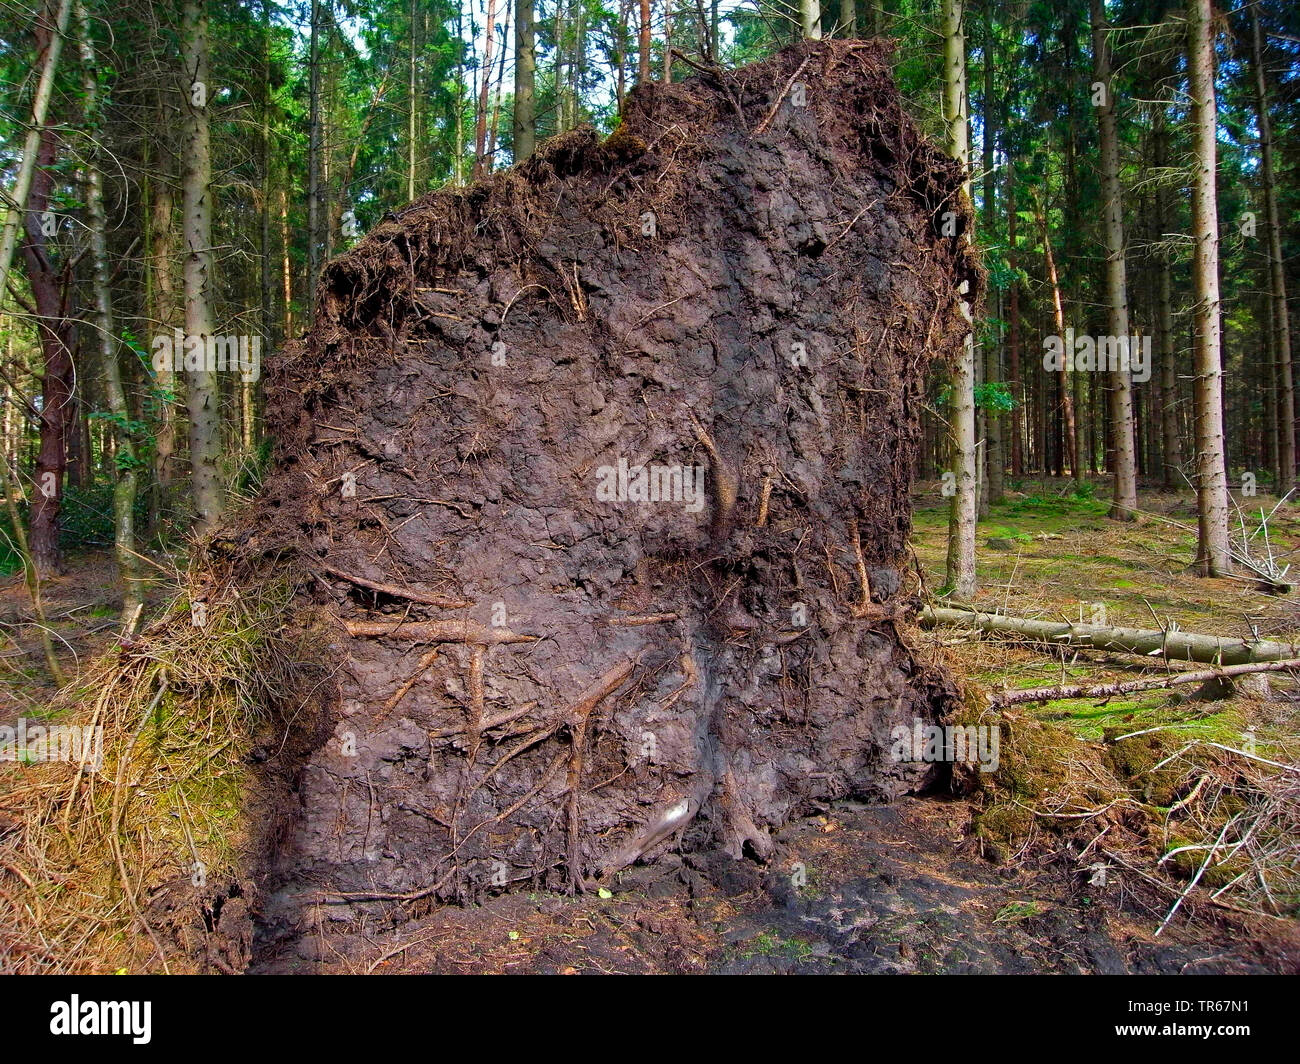 Norway spruce (Picea abies), fallen tree after a storm Stock Photo